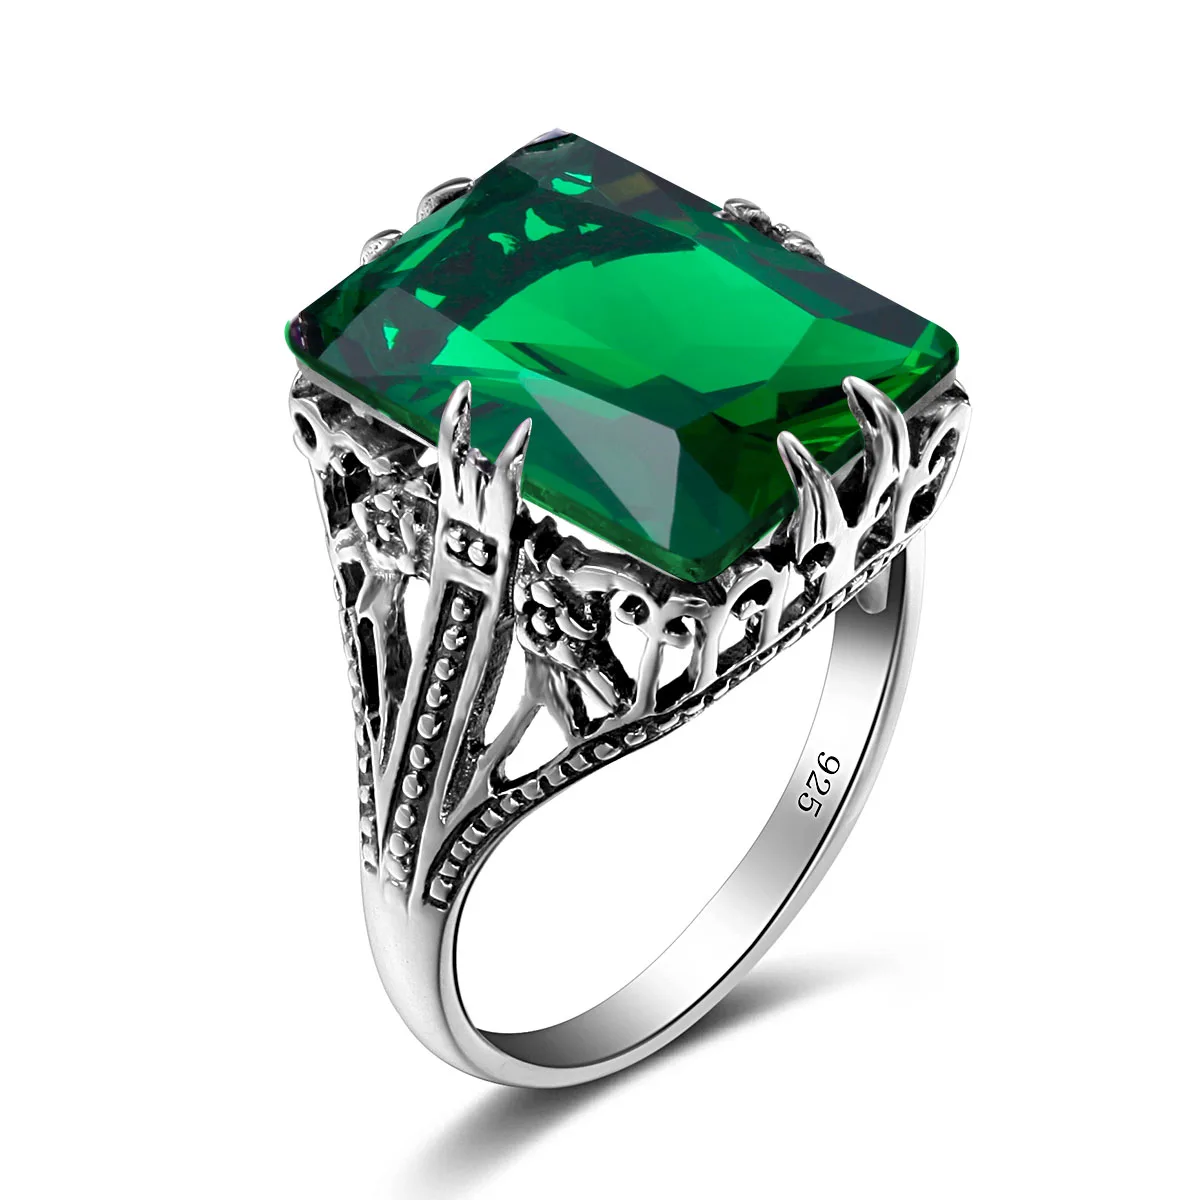 

Unique Handmade 925 Sterling Silver Ring Women Vintage Luxury Women Party Jewelry Factory Wholesale Emerald Stones